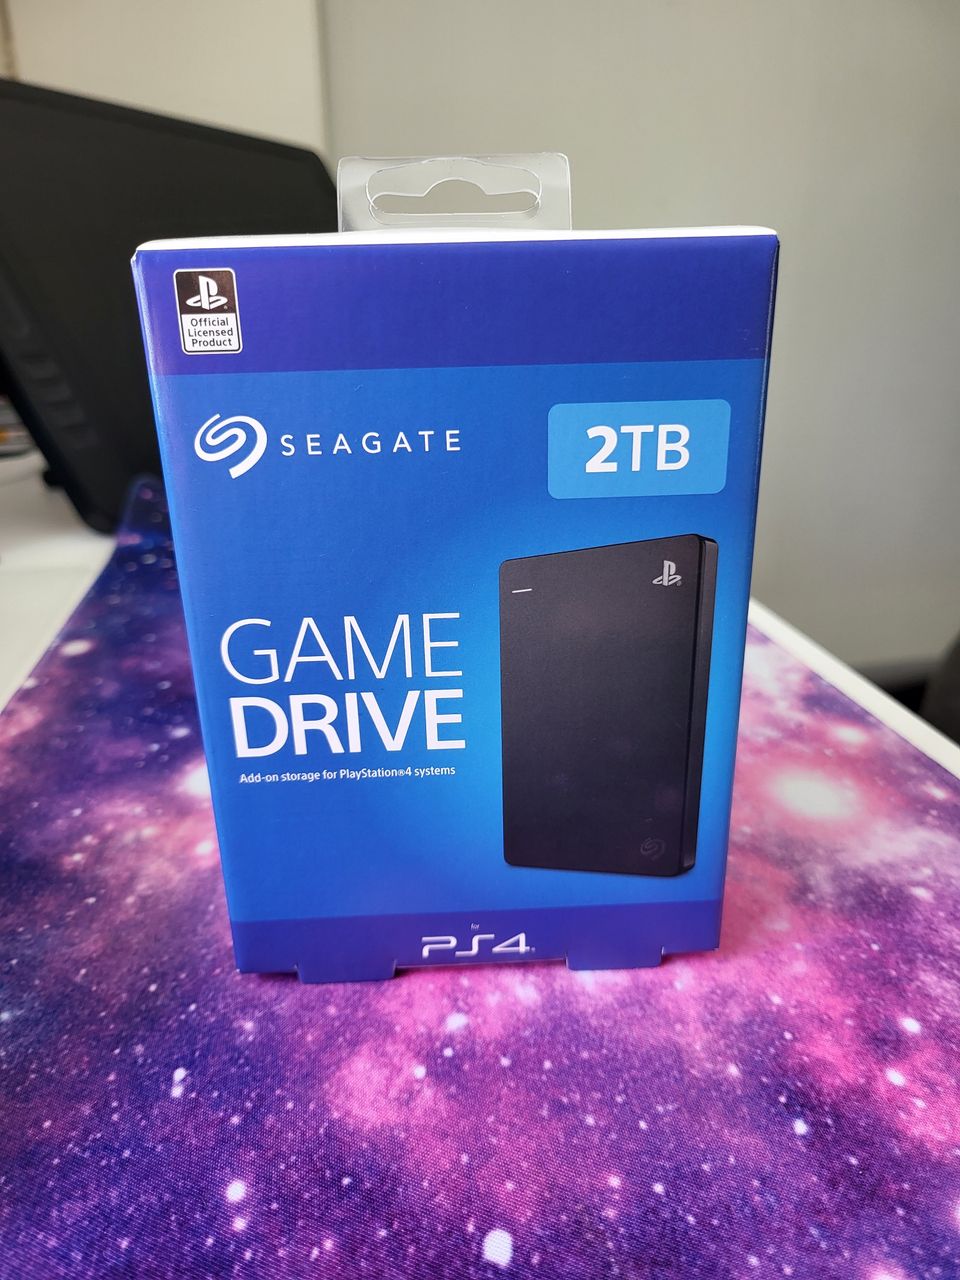 Seagate 2TB Game drive, PS4, PS5, ulkoinen kovalevy, uusi